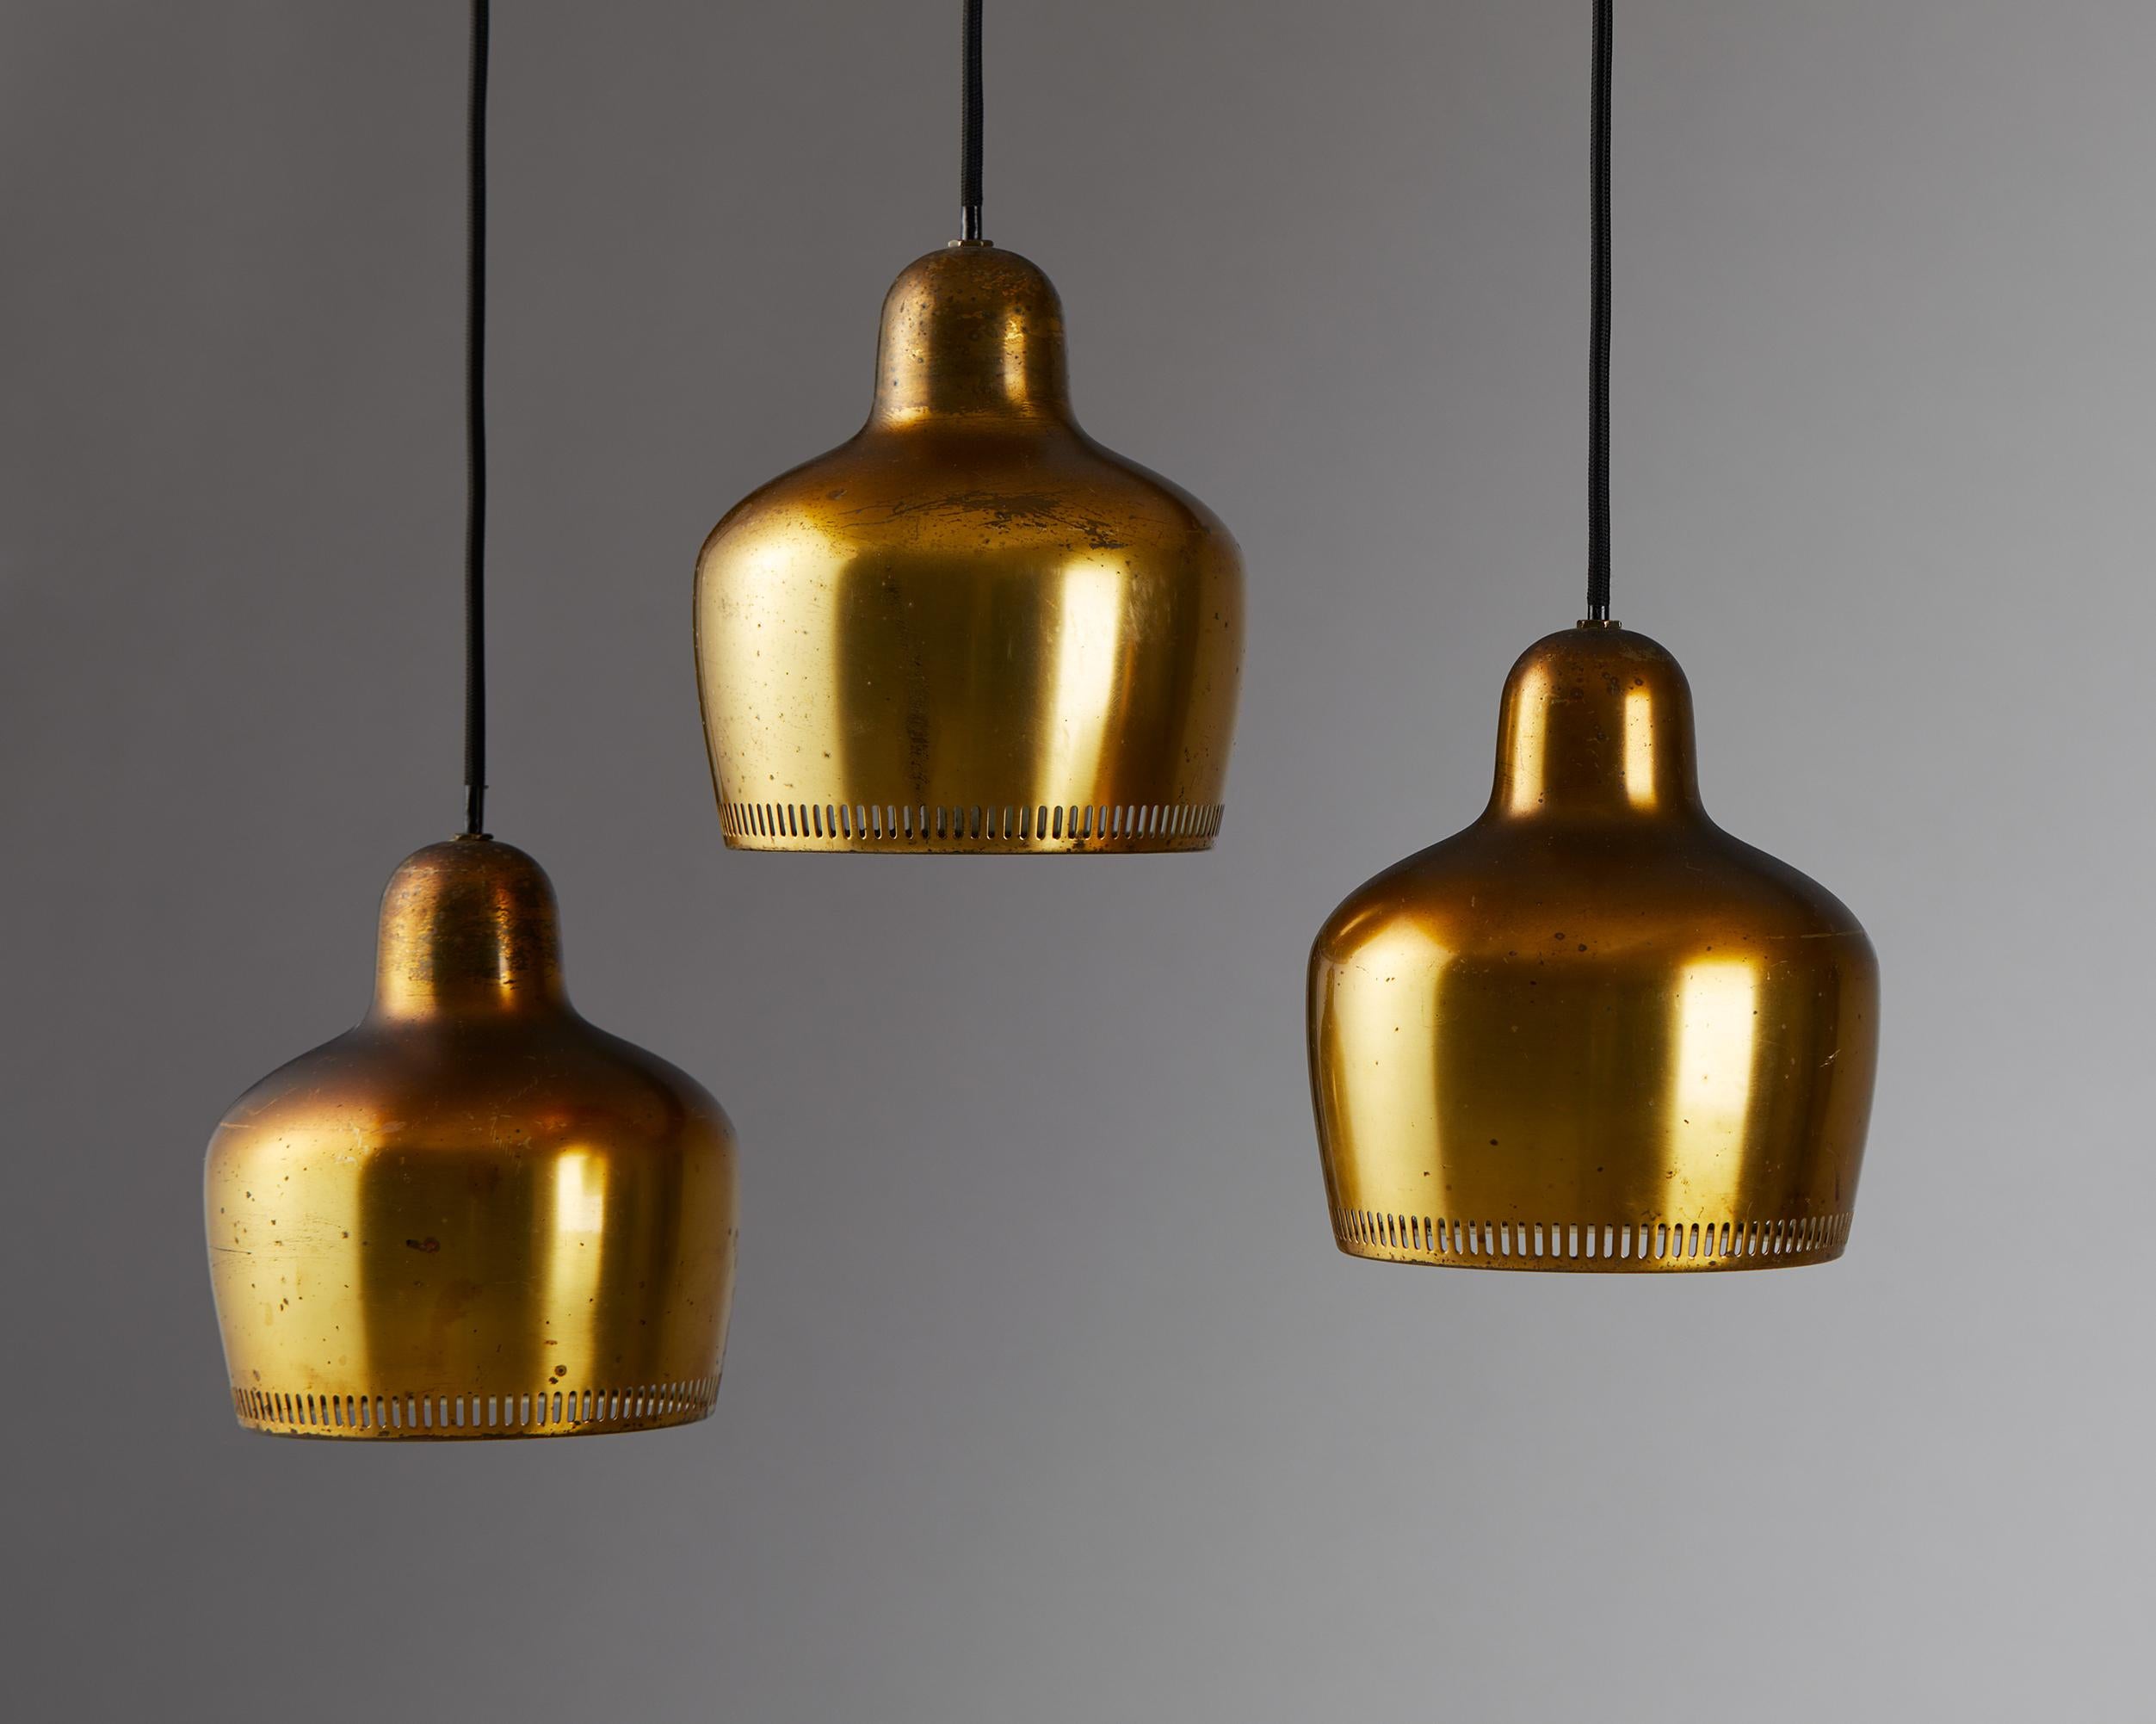 Finnish Set of Three ‘Golden Bell’ Ceiling Lamps Model A 330 Designed by Alvar Aalto